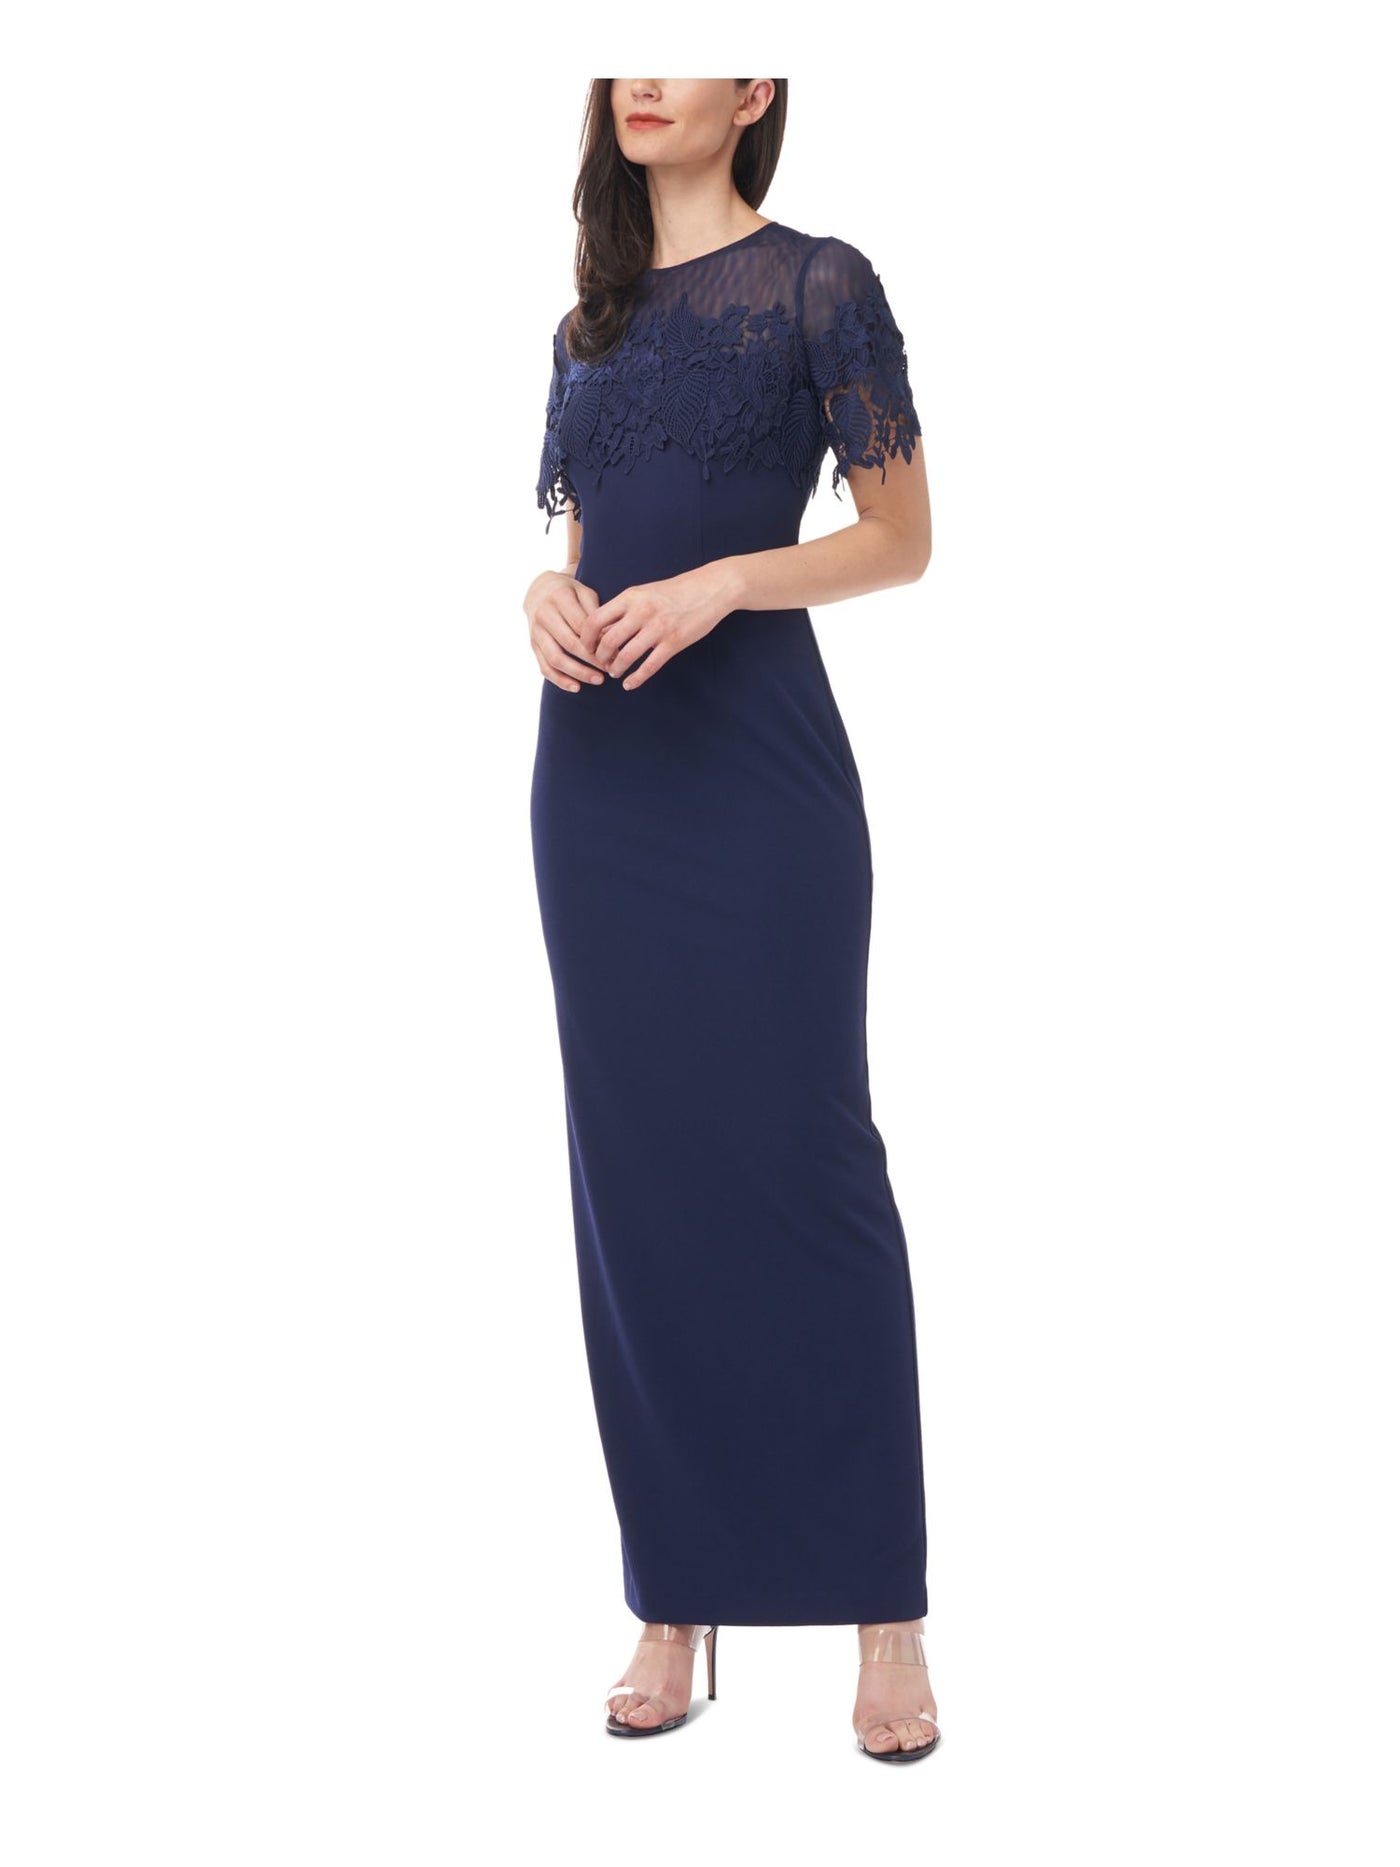 JS COLLECTIONS Womens Navy Stretch Zippered Embroidered Illusion Yoke Gown Short Sleeve Crew Neck Maxi Evening Gown Dress 2